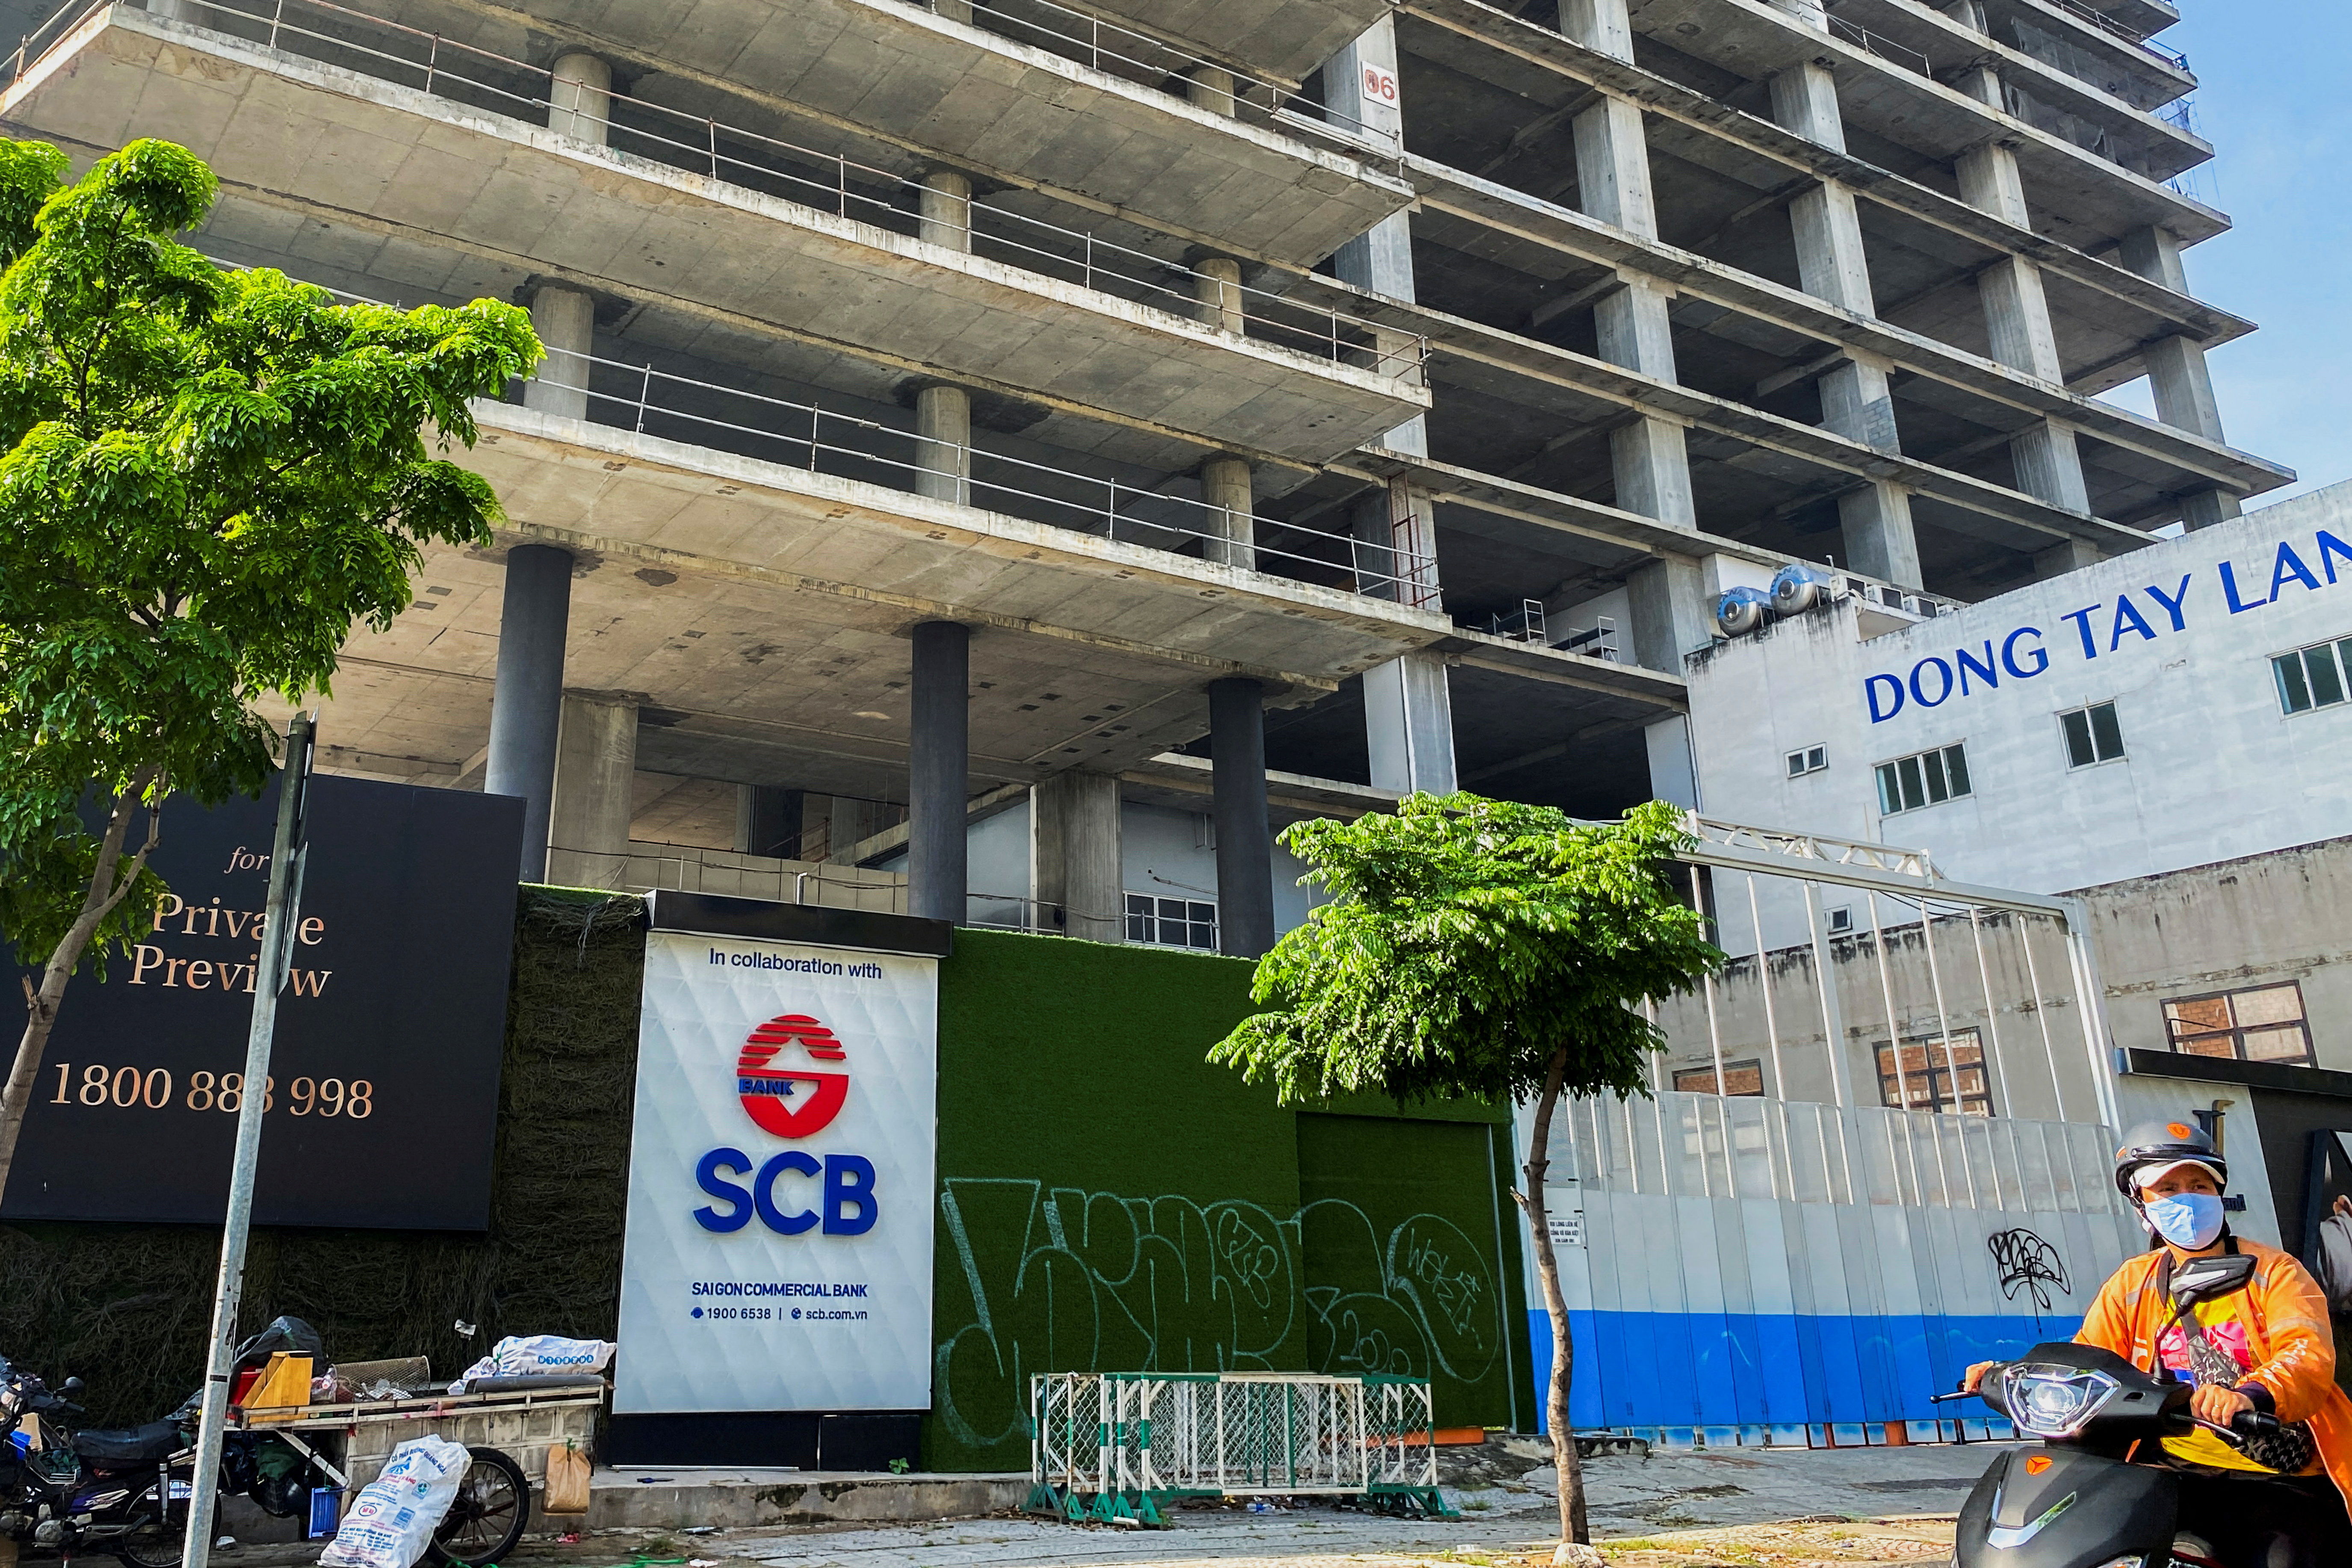 A logo of Saigon Joint Stock Commercial Bank (SCB) is seen in front of an under-construction building in Ho Chi Minh City